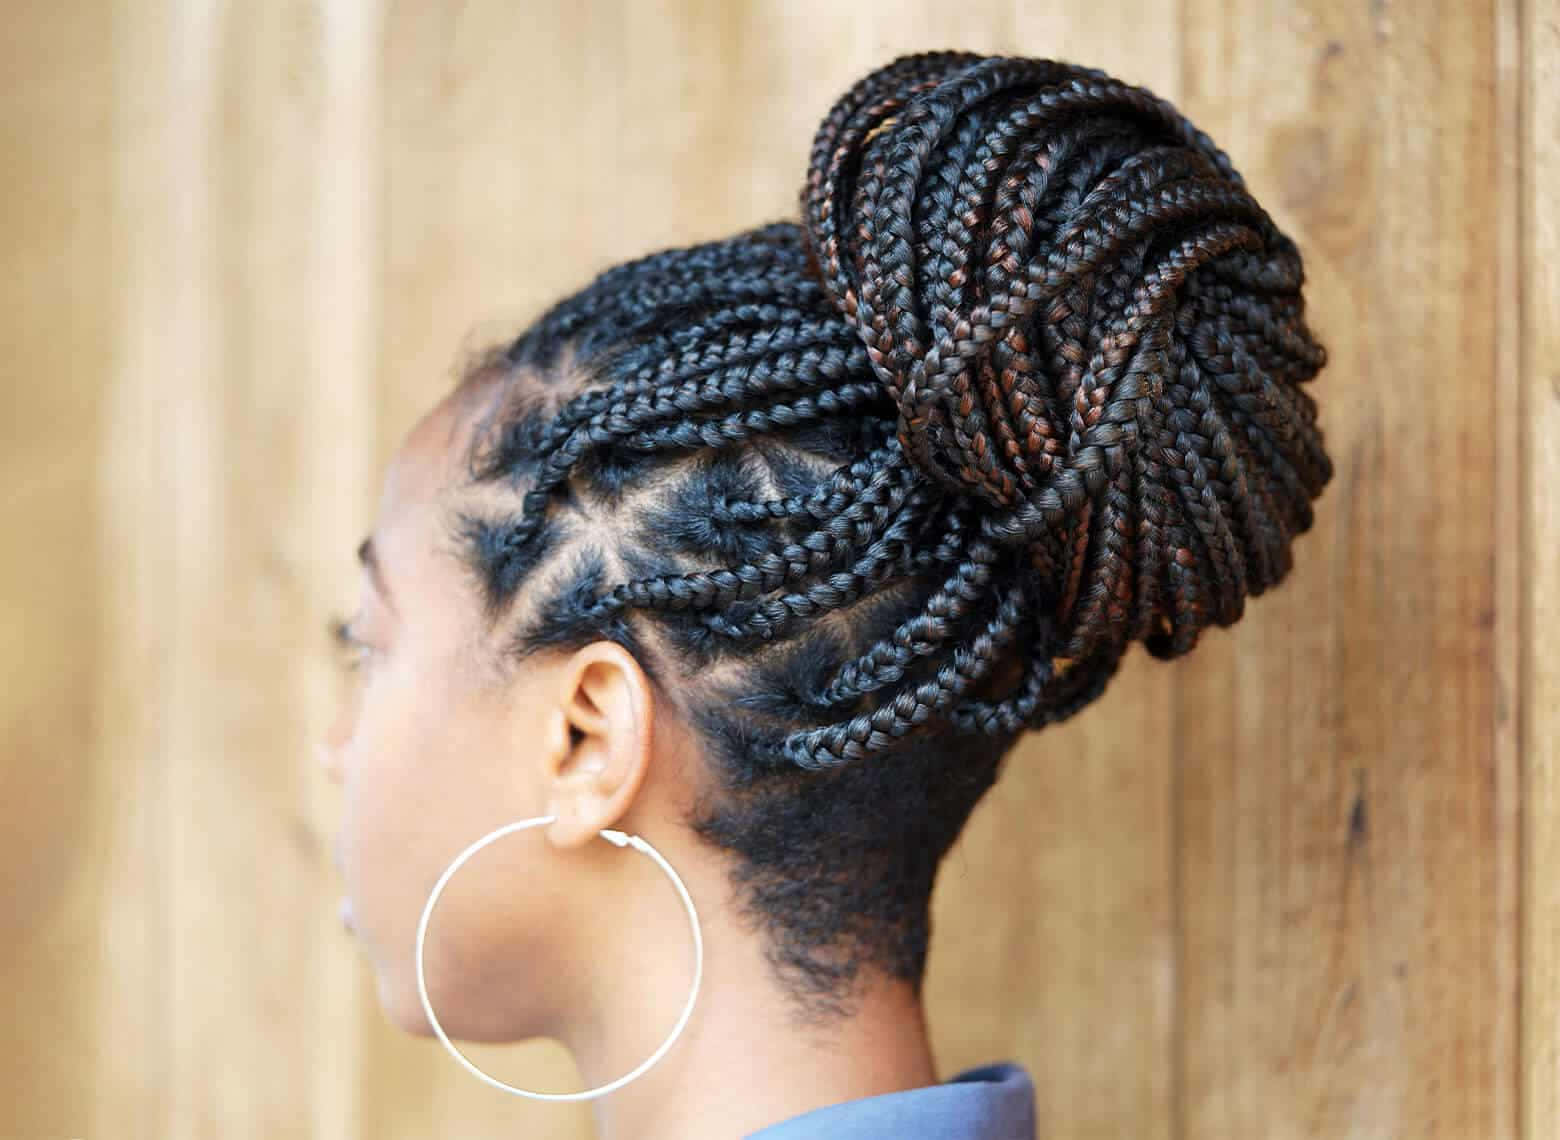 Download A Woman With Braids In Her Hair